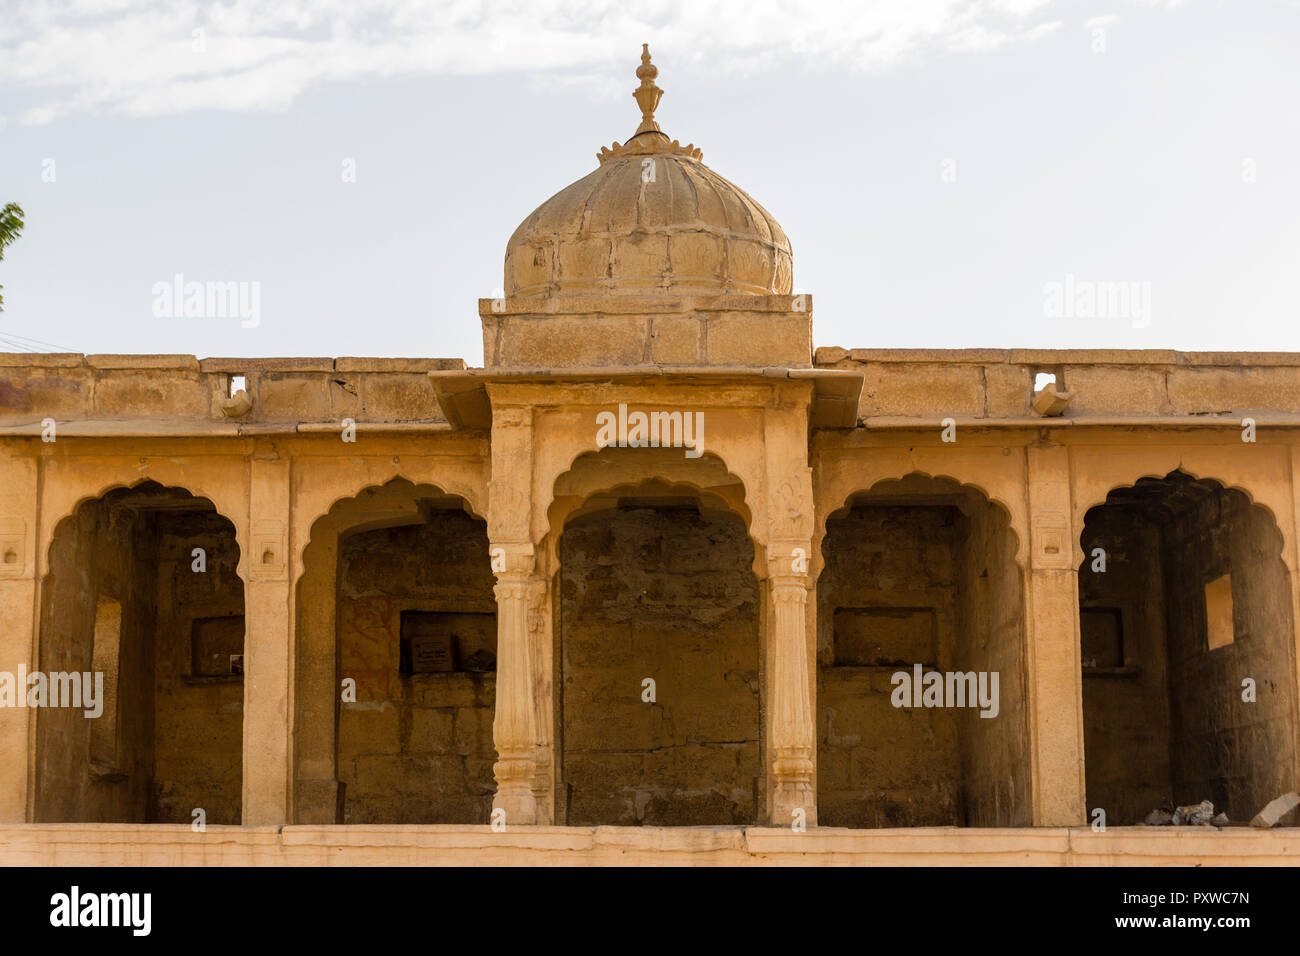 A building with arches near the Gadisar lake in the desert city of Rajasthan in India Stock Photo